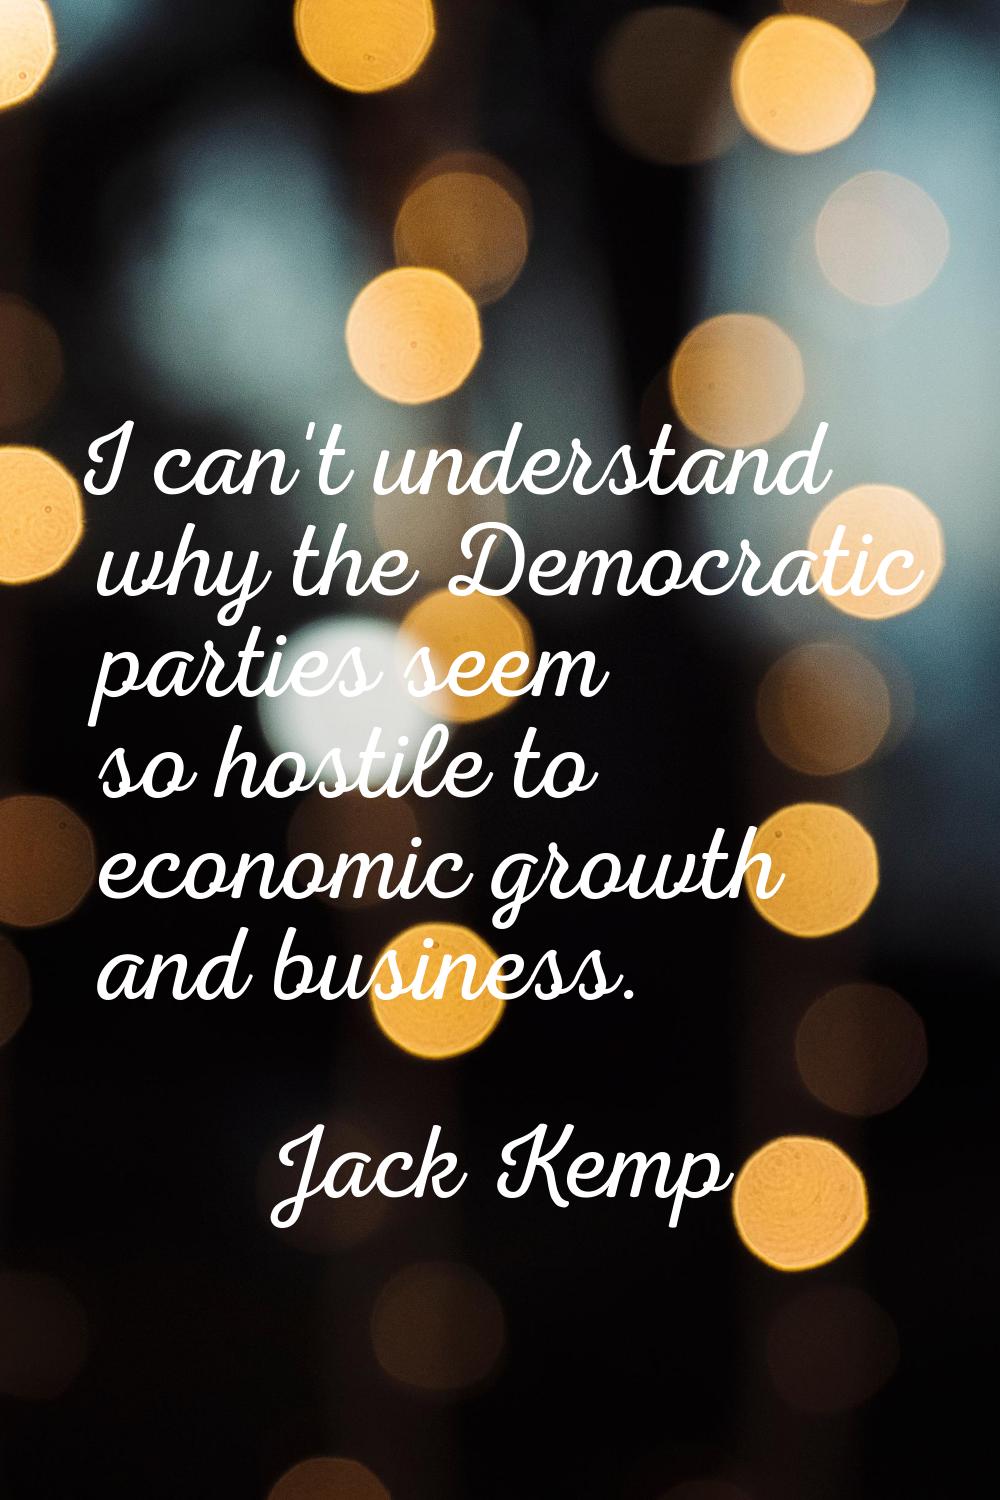 I can't understand why the Democratic parties seem so hostile to economic growth and business.